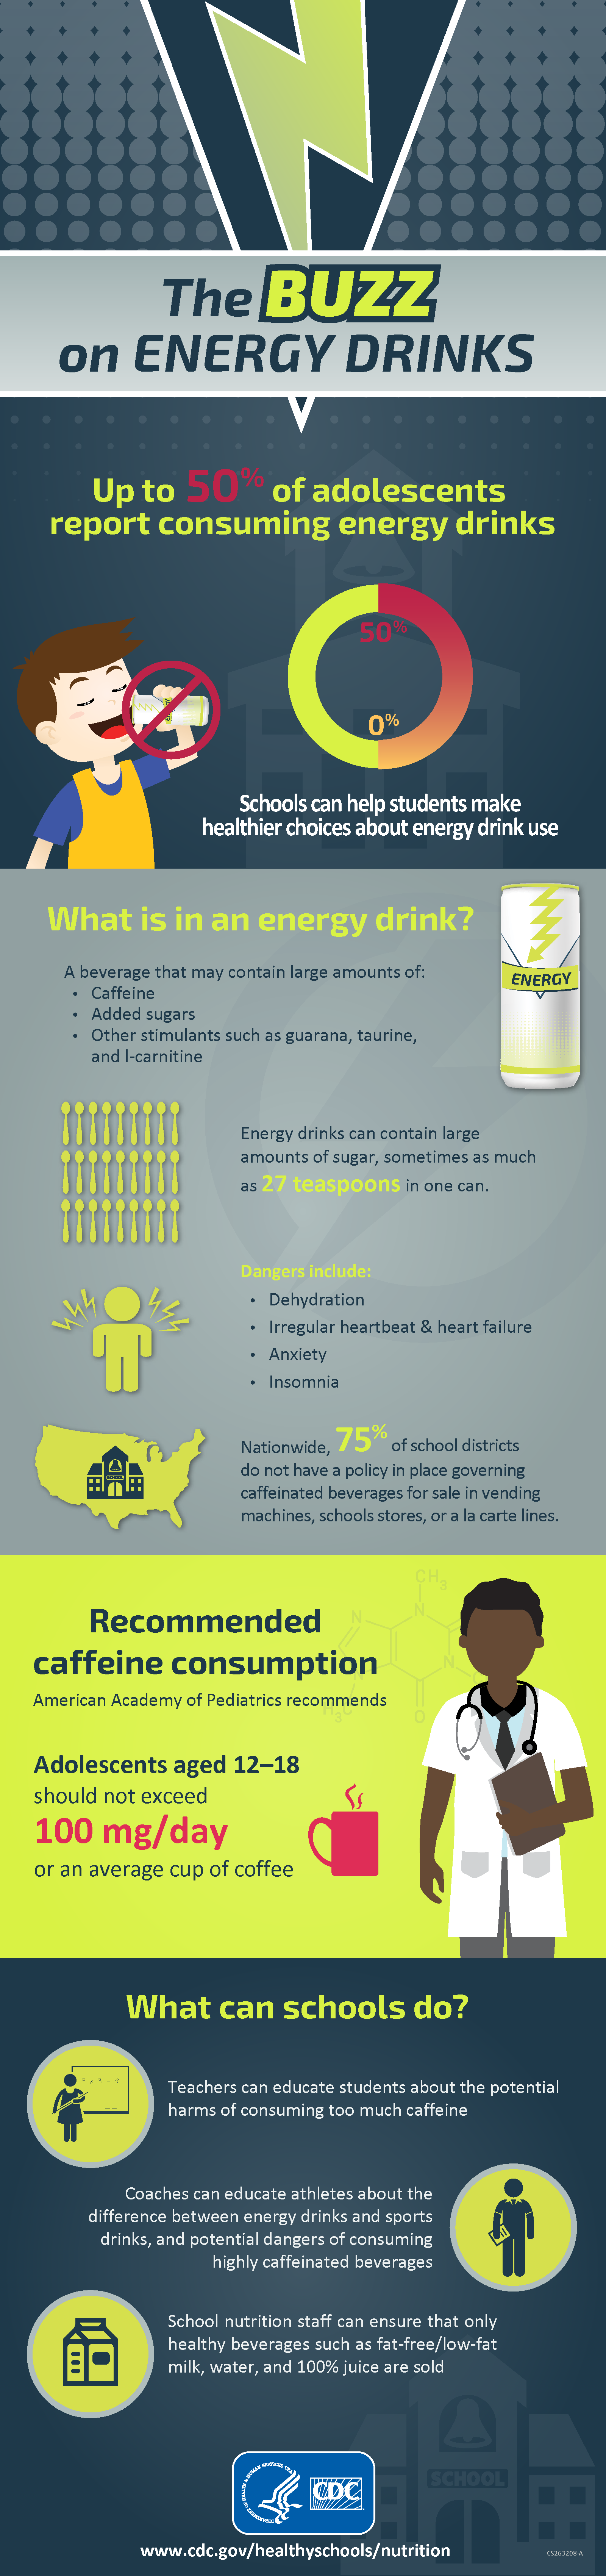 The Real Difference Between Energy Drinks & Sports Drinks